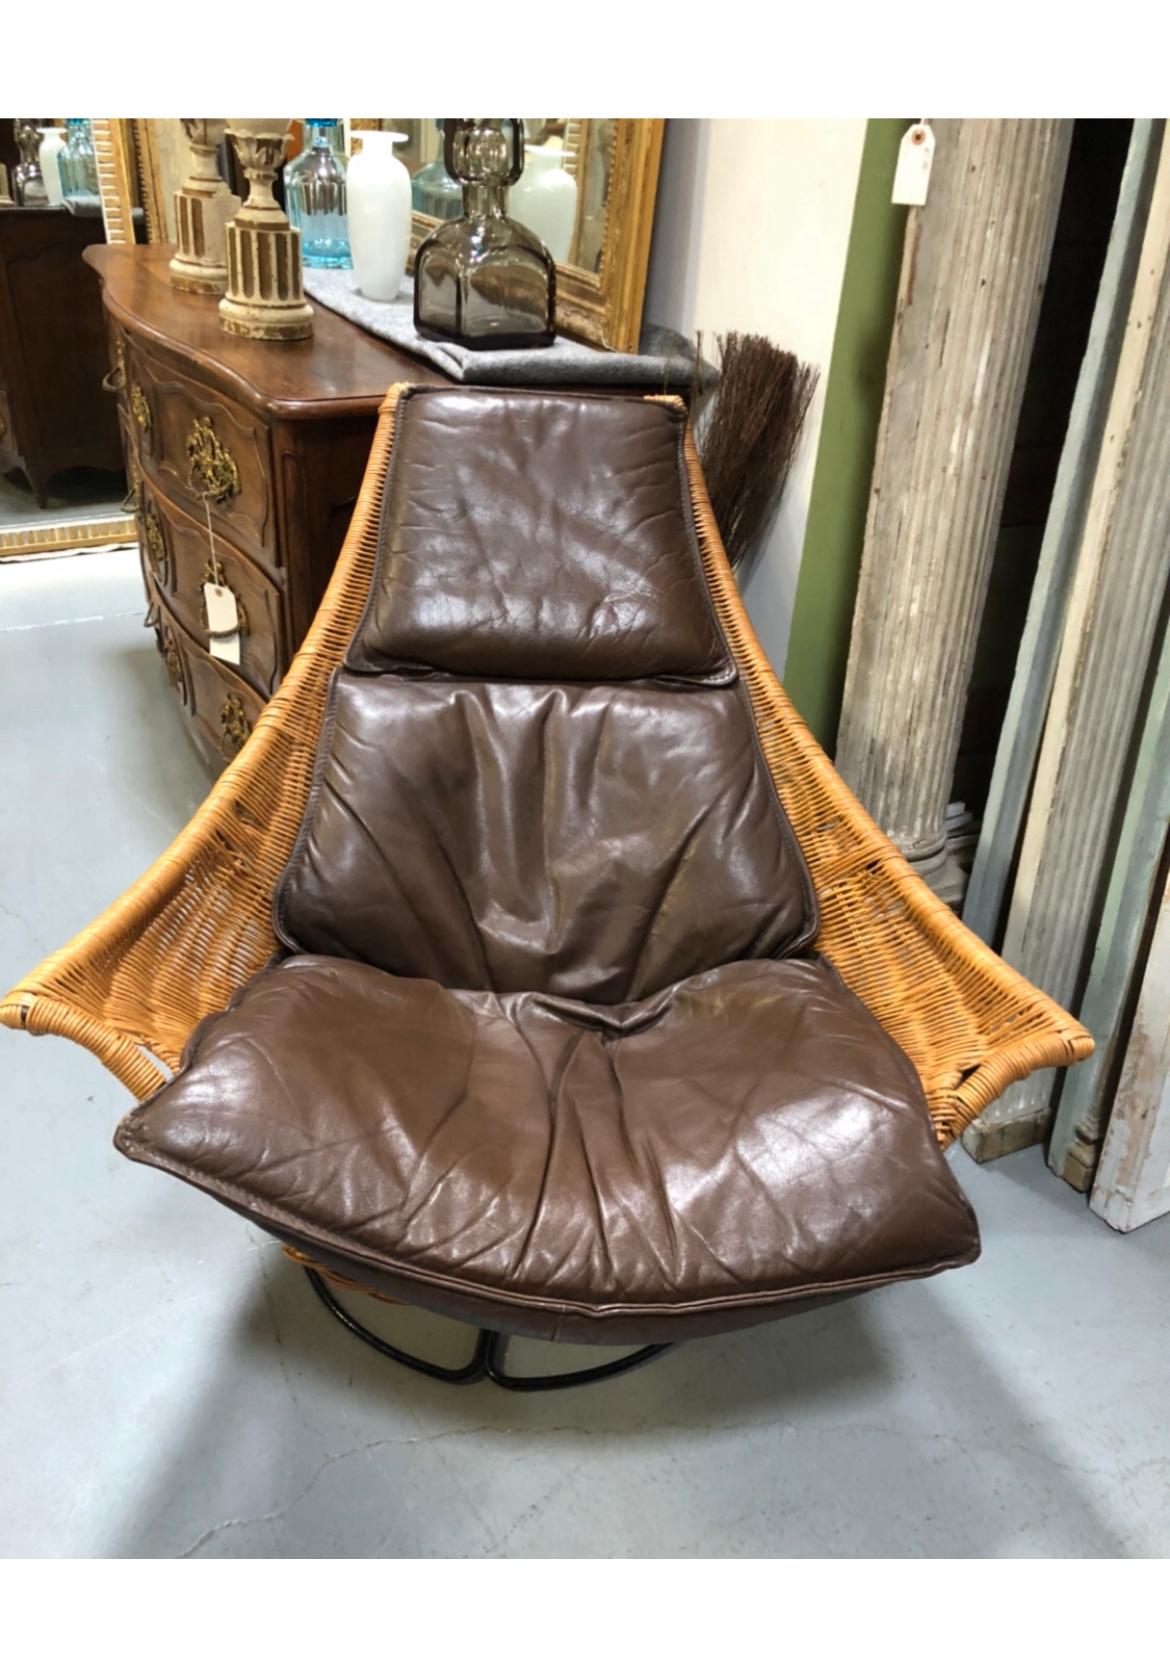 Excellent condition in cane and leather cushion. Super comfortable.